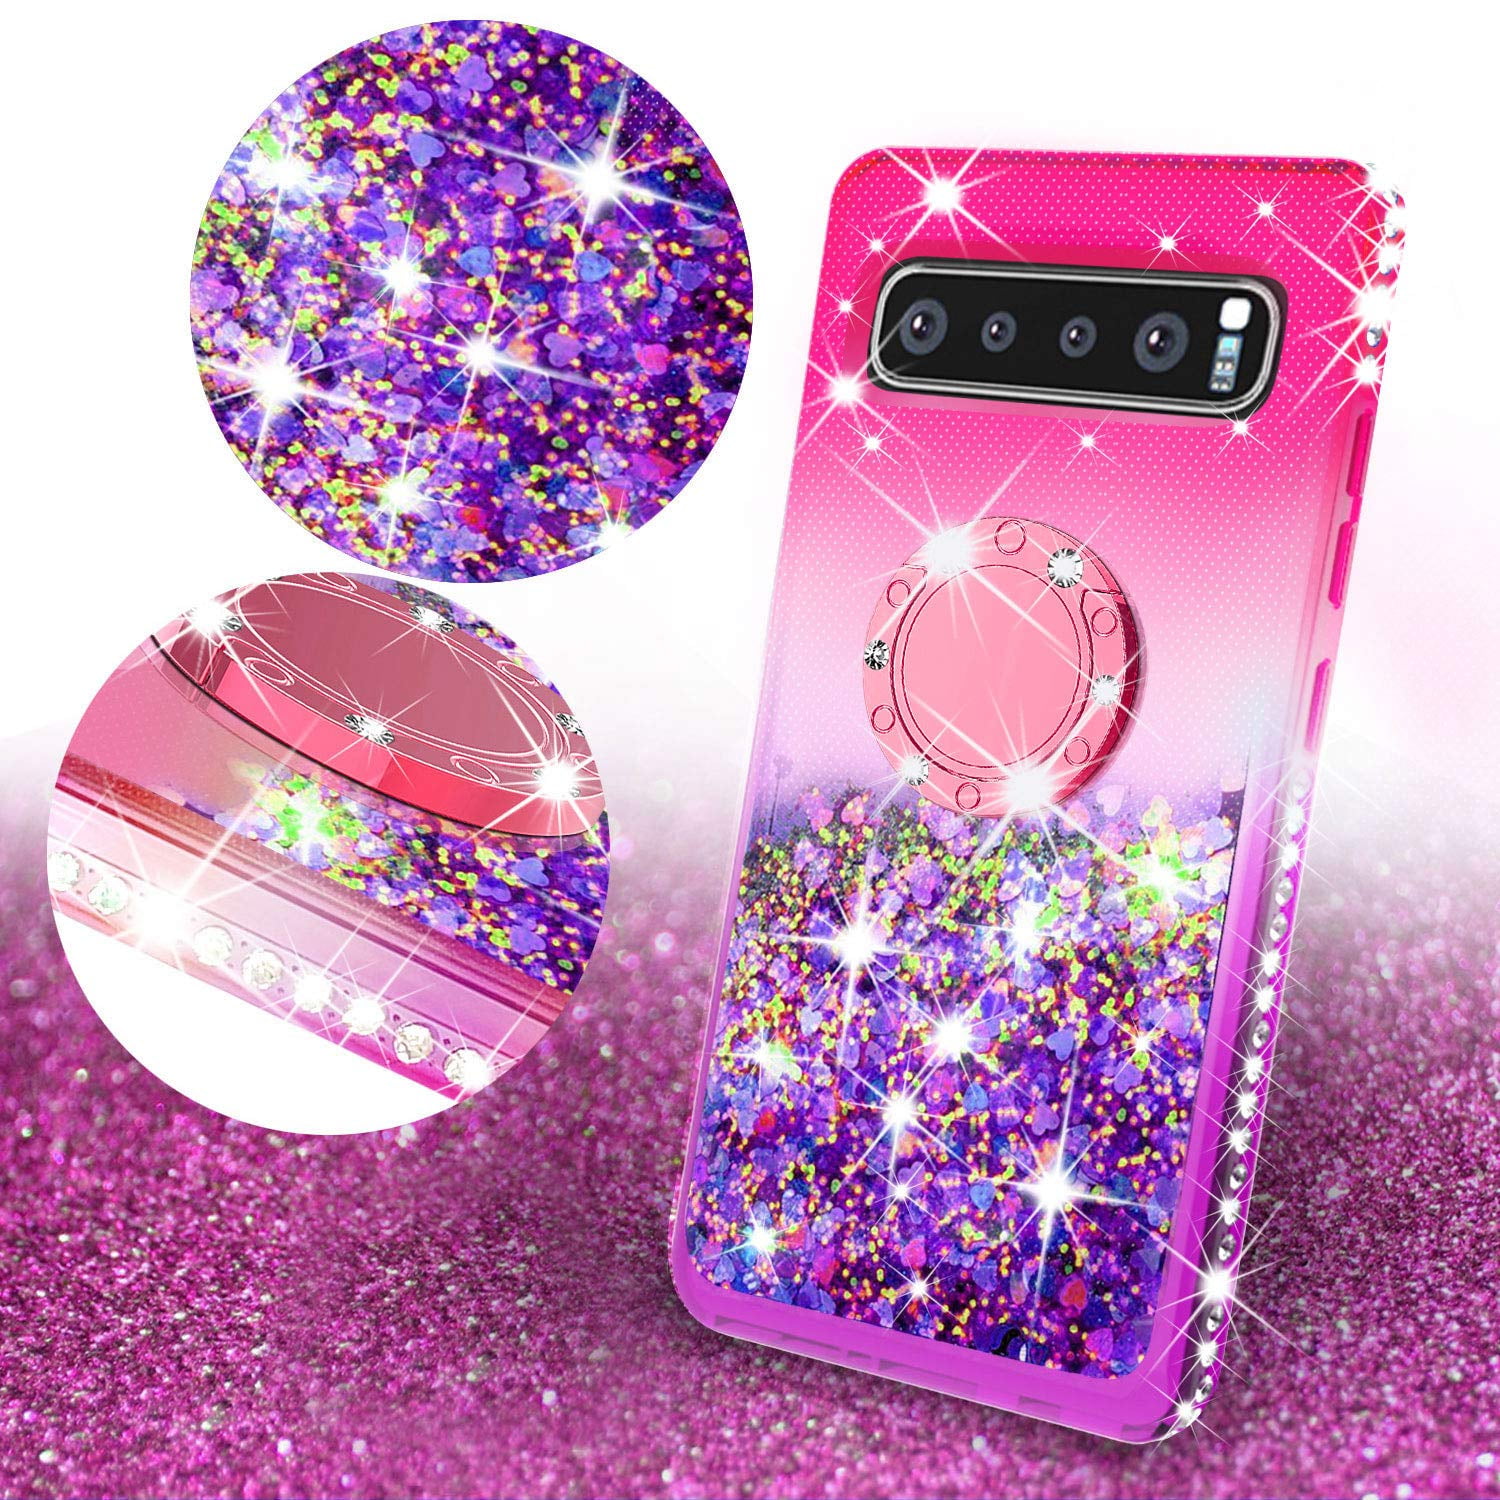 Tznzxm for Galaxy S10 Plus Case Glitter Floating TPU Gradient Quicksand Shockproof Bling Diamond Sparkly Defender 360 Finger Kickstand Ring Protective Case for Samsung Galaxy S10 Plus Grey/Pink 